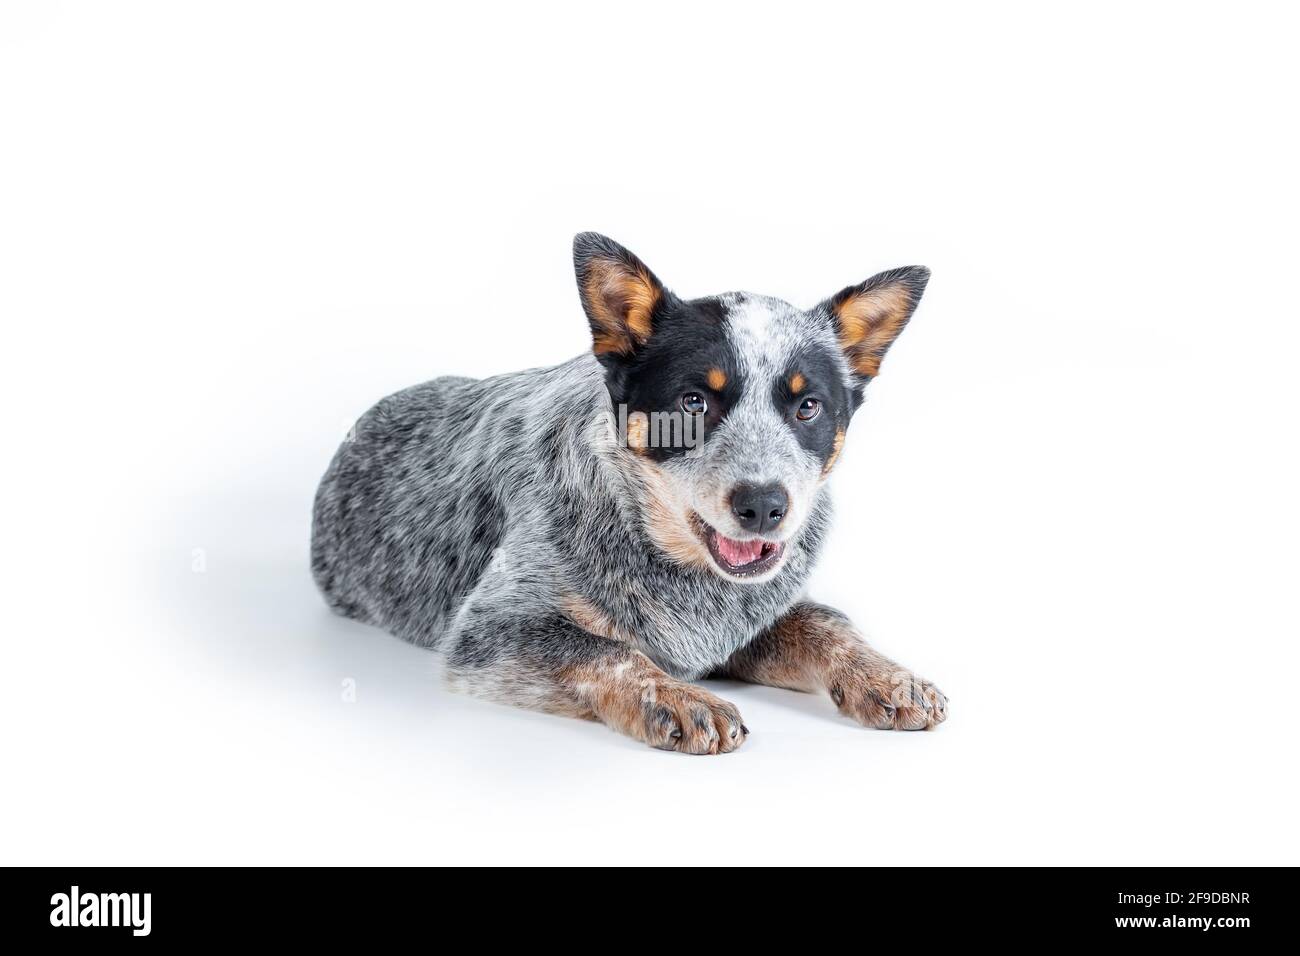 Cute blue heeler or australian cattle dog puppy lying down against white background Stock Photo